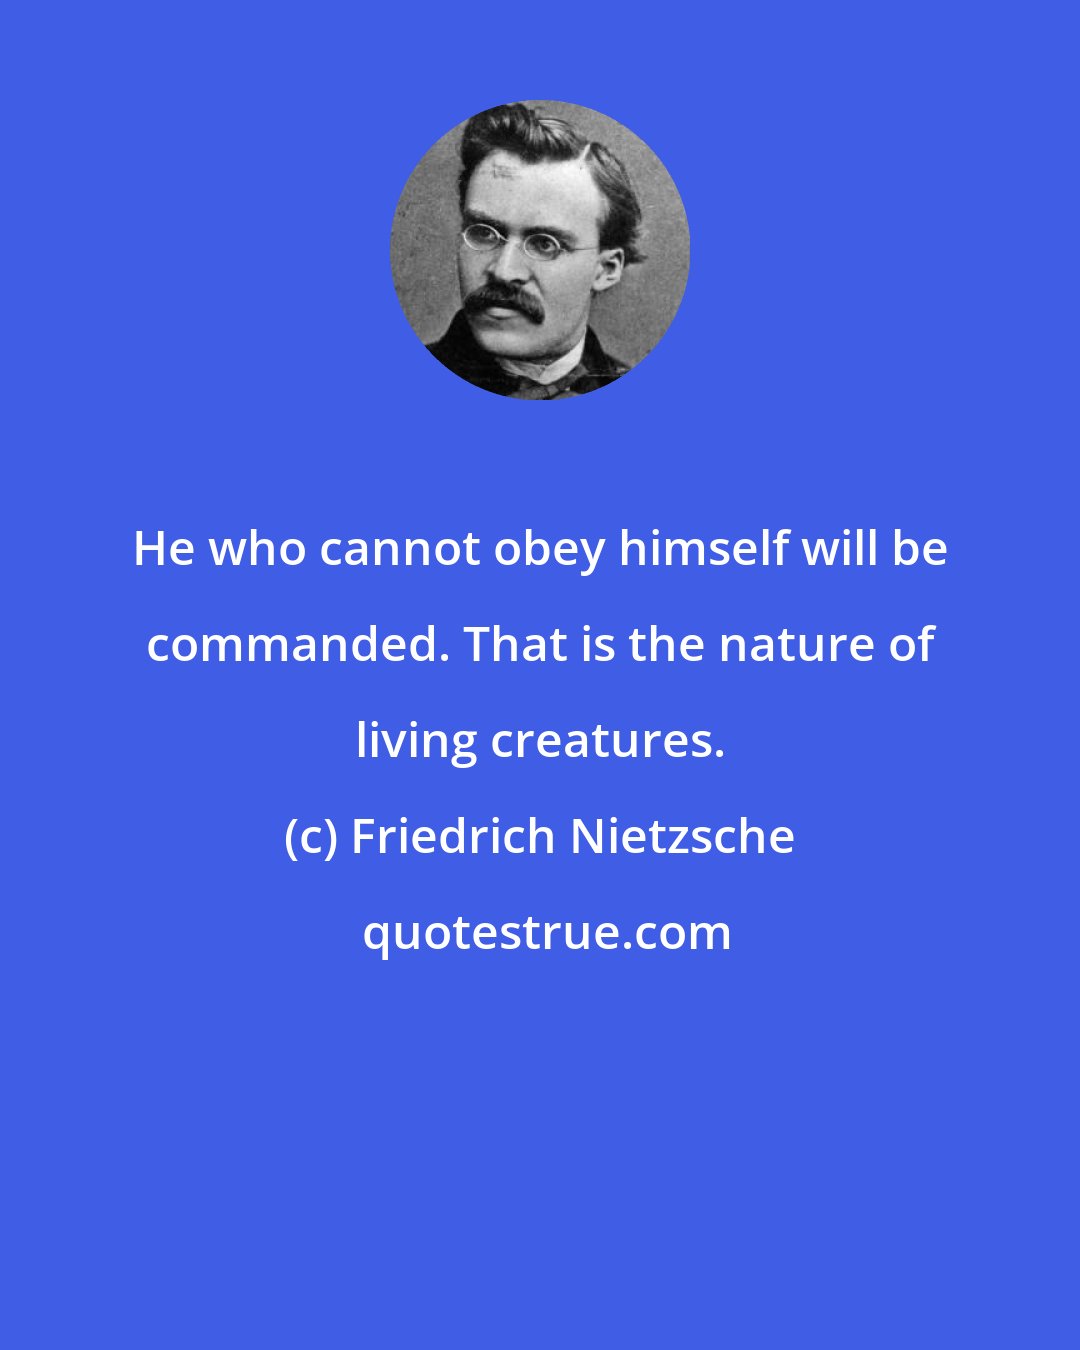 Friedrich Nietzsche: He who cannot obey himself will be commanded. That is the nature of living creatures.